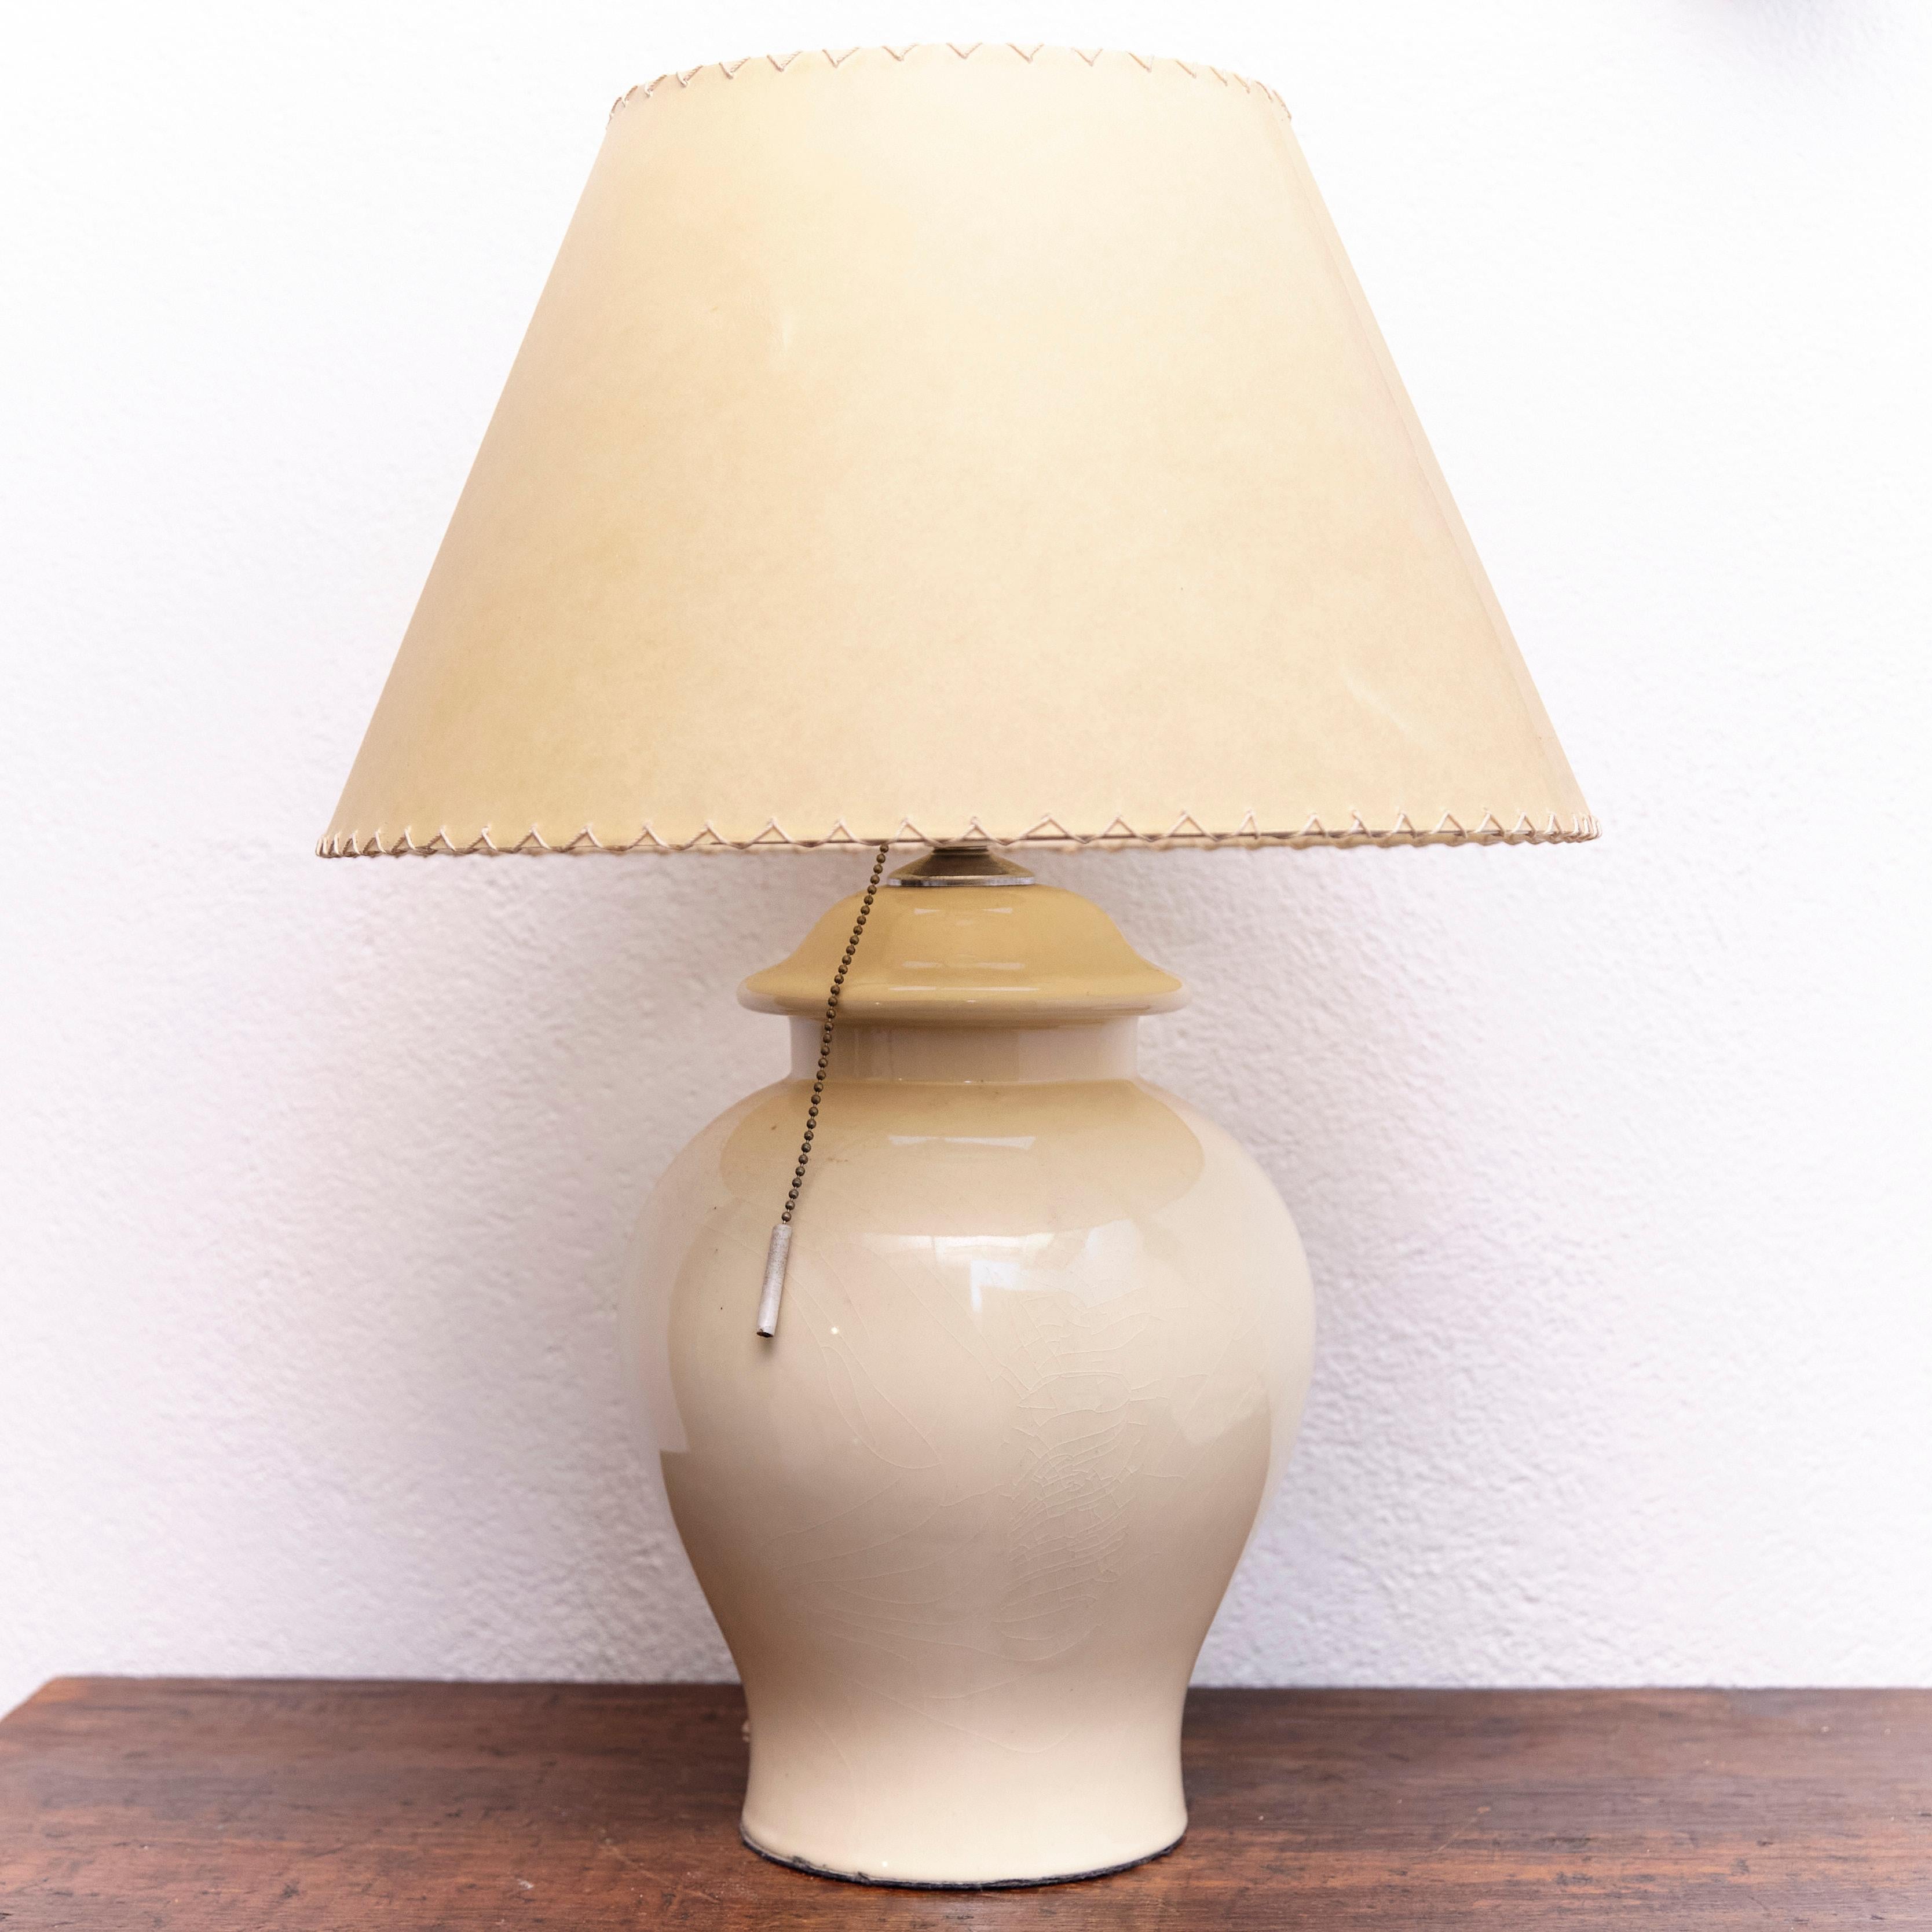 Ceramic vintage table lamp. Made of ceramic with a fabric screen.

Made bay unknown manufacturer in Spain, circa 1960

In original condition, wear consistent with age and use, preserving a beautiful patina.

Materials:
Ceramic
Fabric
Metal.